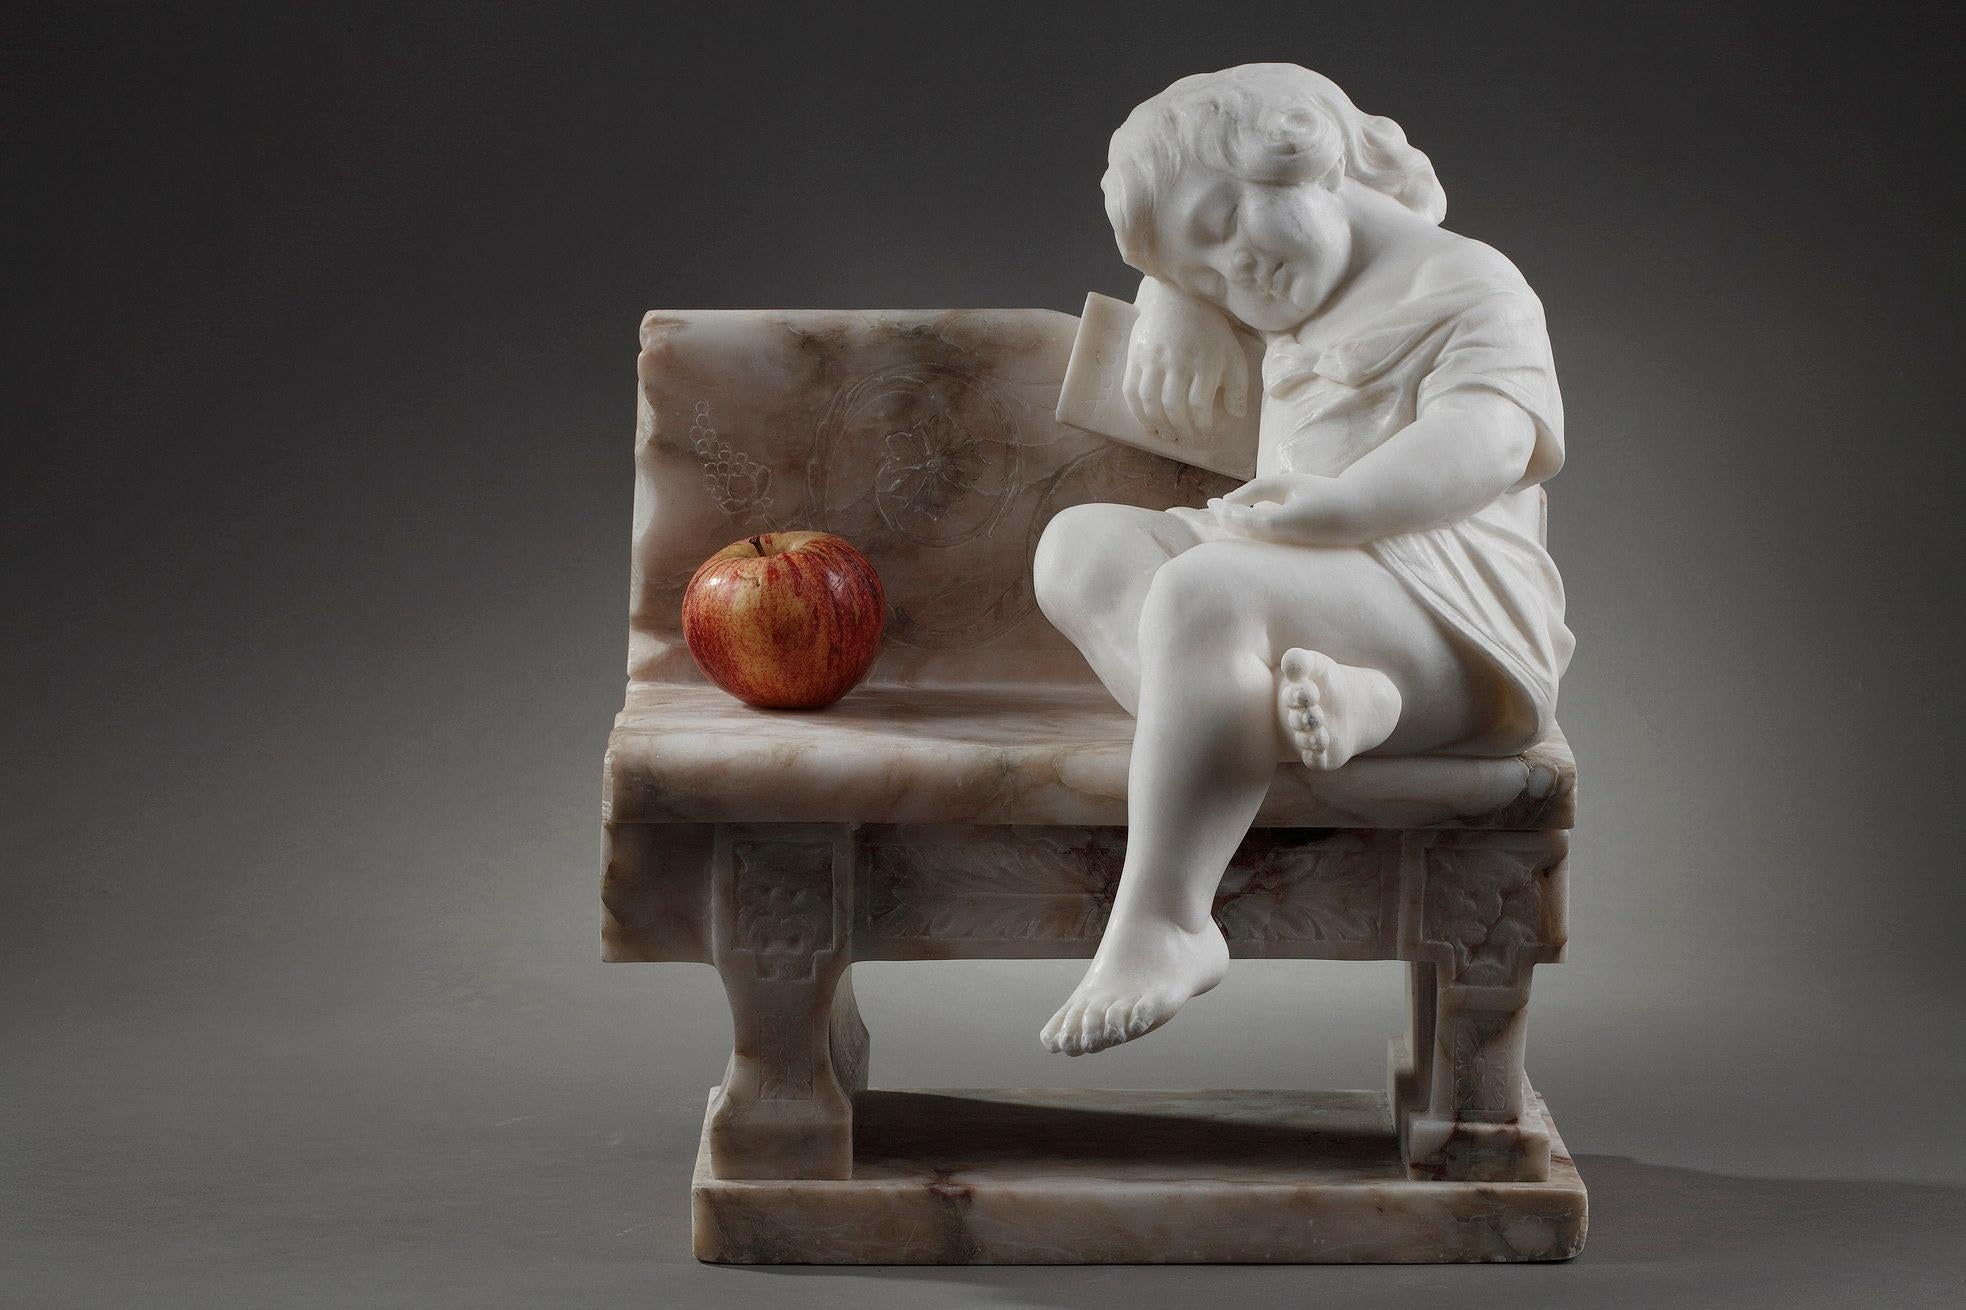 This sculpture is made of alabaster and marble. A young child, in alabaster, dressed in a short open shirt, is asleep with his legs crossed. His hair form a curl around his left ear. He is using a book with the first four letters of the alphabet as